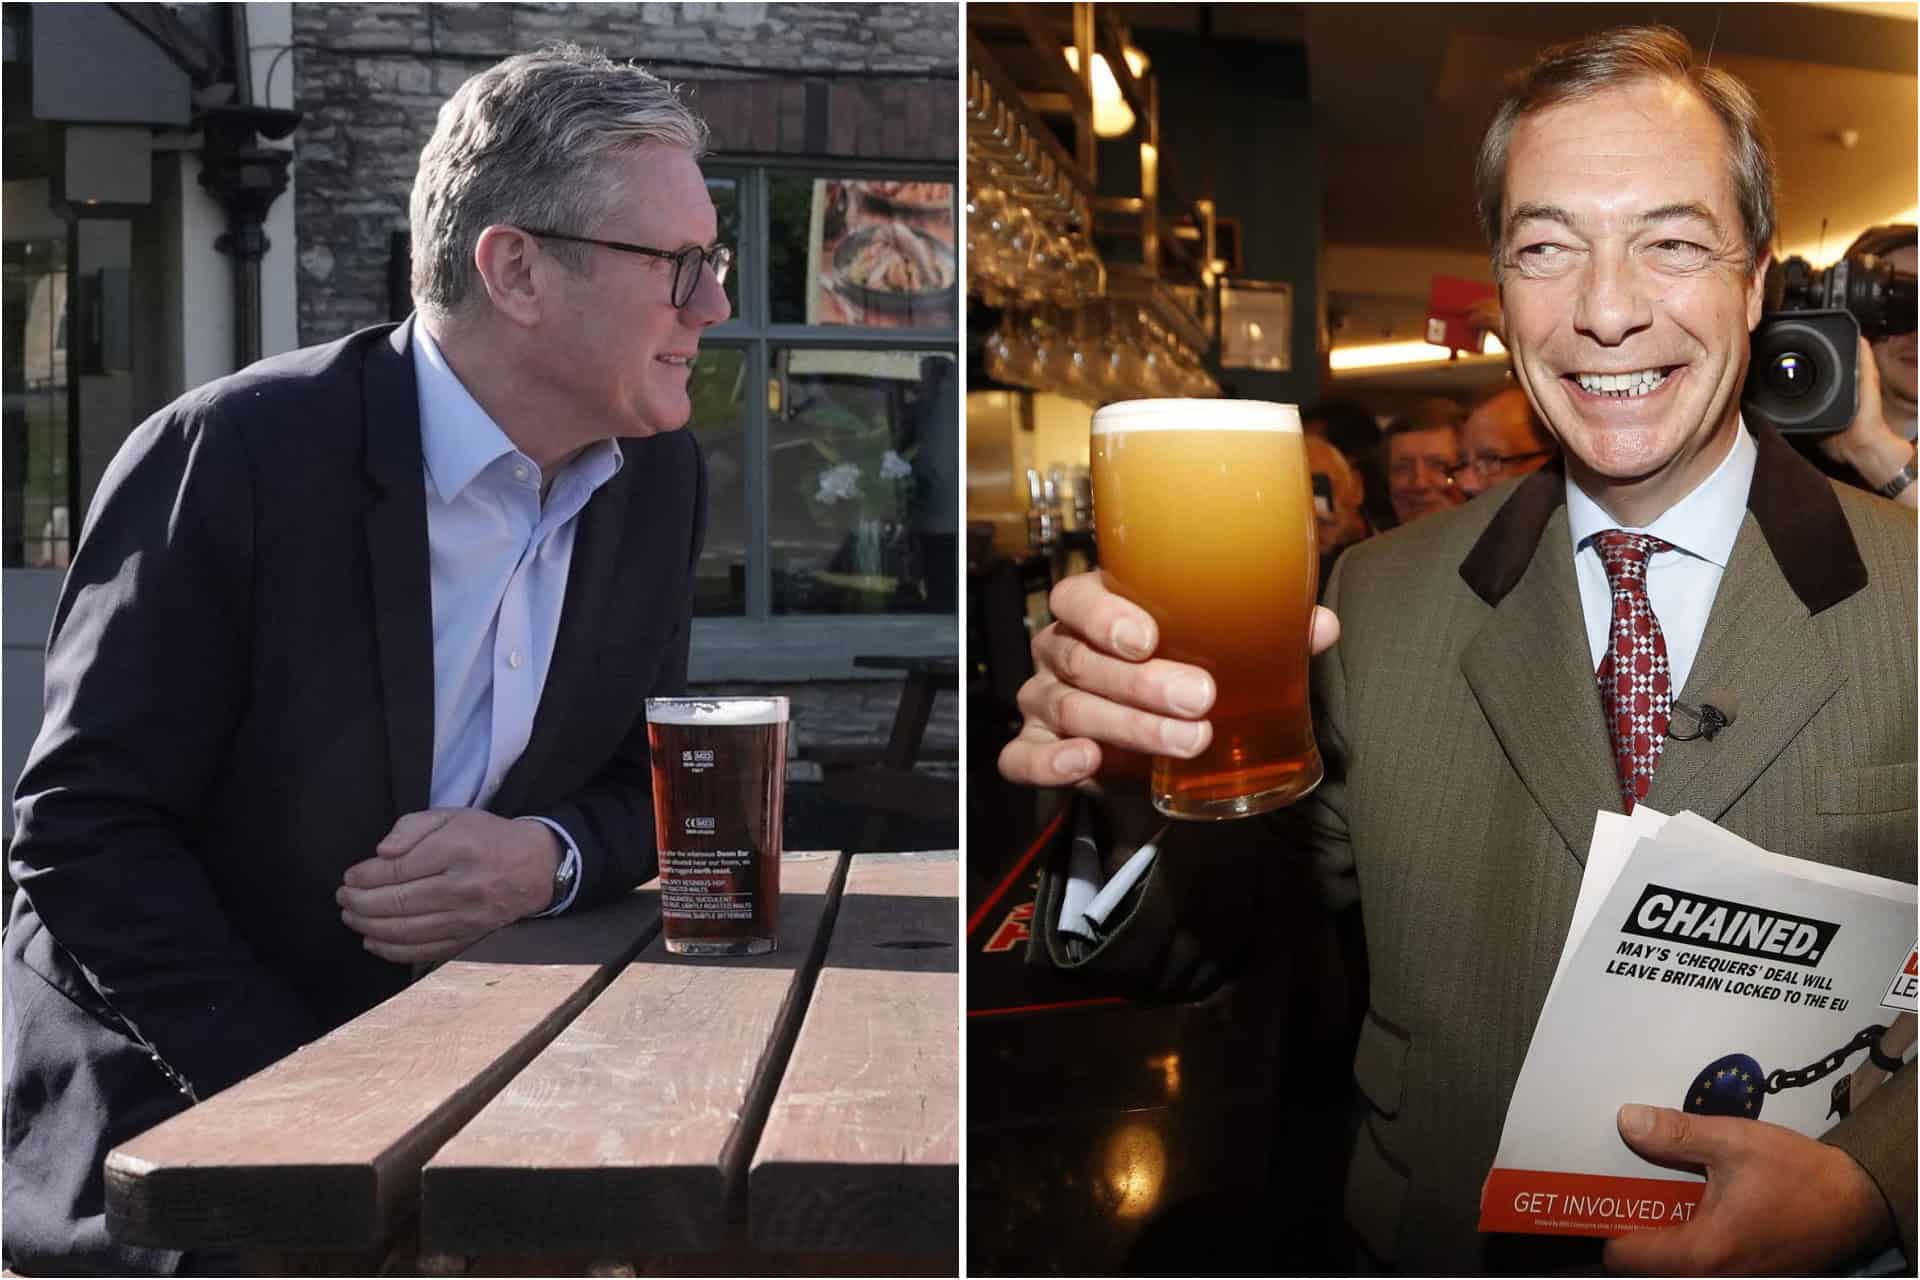 Pimms drinkers back Labour as shandy lovers side with Reform